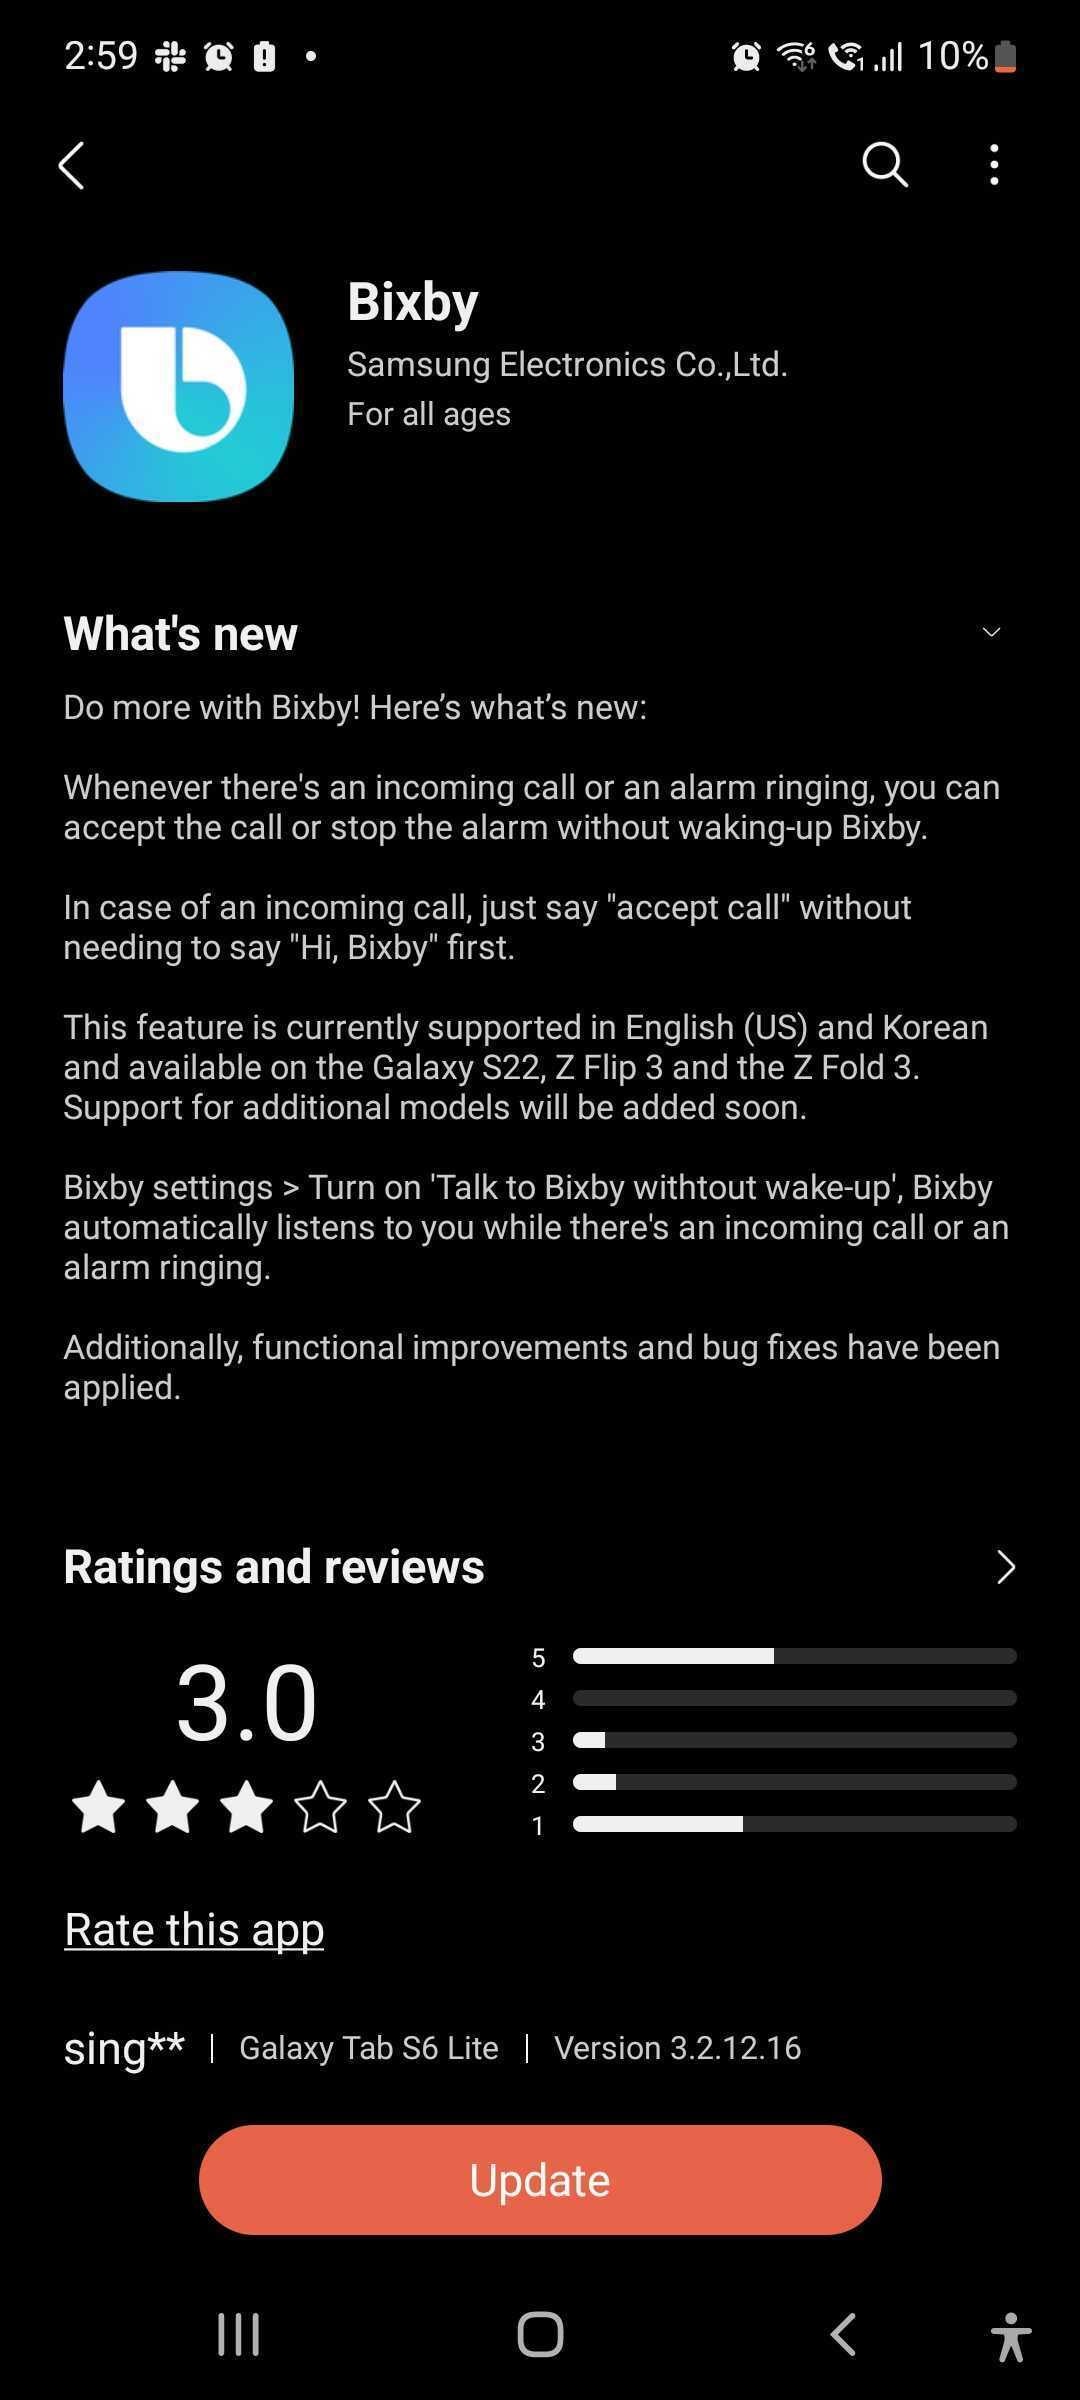 Samsung's Bixby digital assistant receives an update - Update to Bixby makes it quicker and easier to answer some Samsung Galaxy phones hands-free